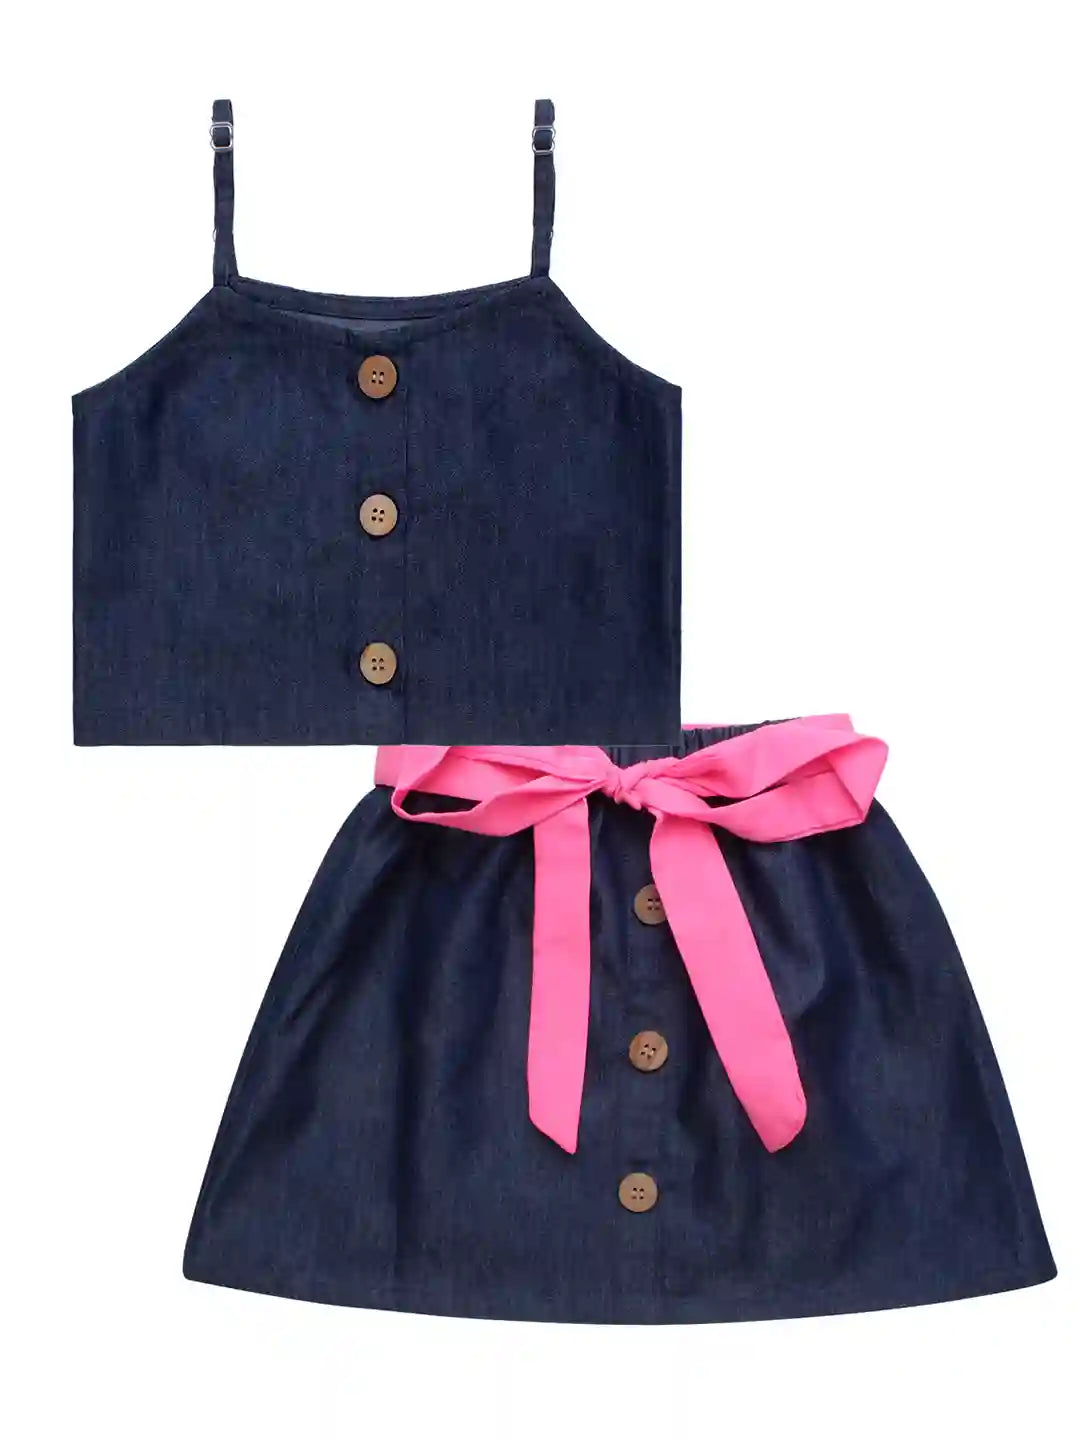 Girls Pure Cotton Denim Top with Skirt Co-ord Set, Navy Blue Colour